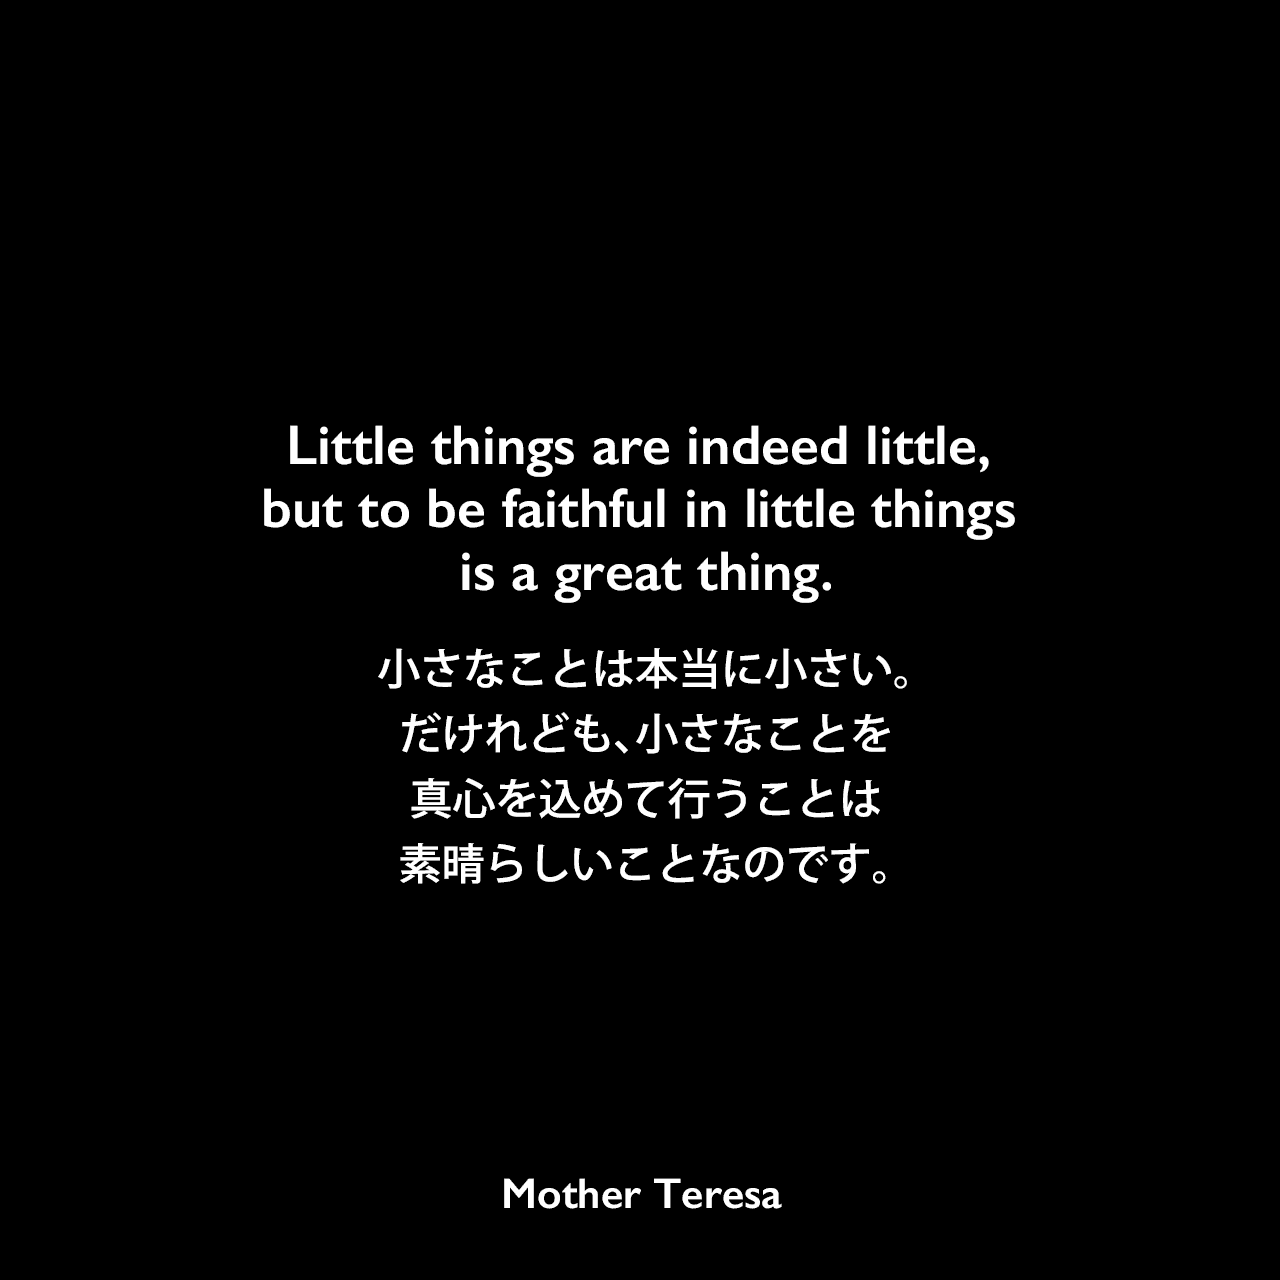 Little things are indeed little, but to be faithful in little things is a great thing.小さなことは本当に小さい。だけれども、小さなことを真心を込めて行うことは素晴らしいことなのです。Mother Teresa